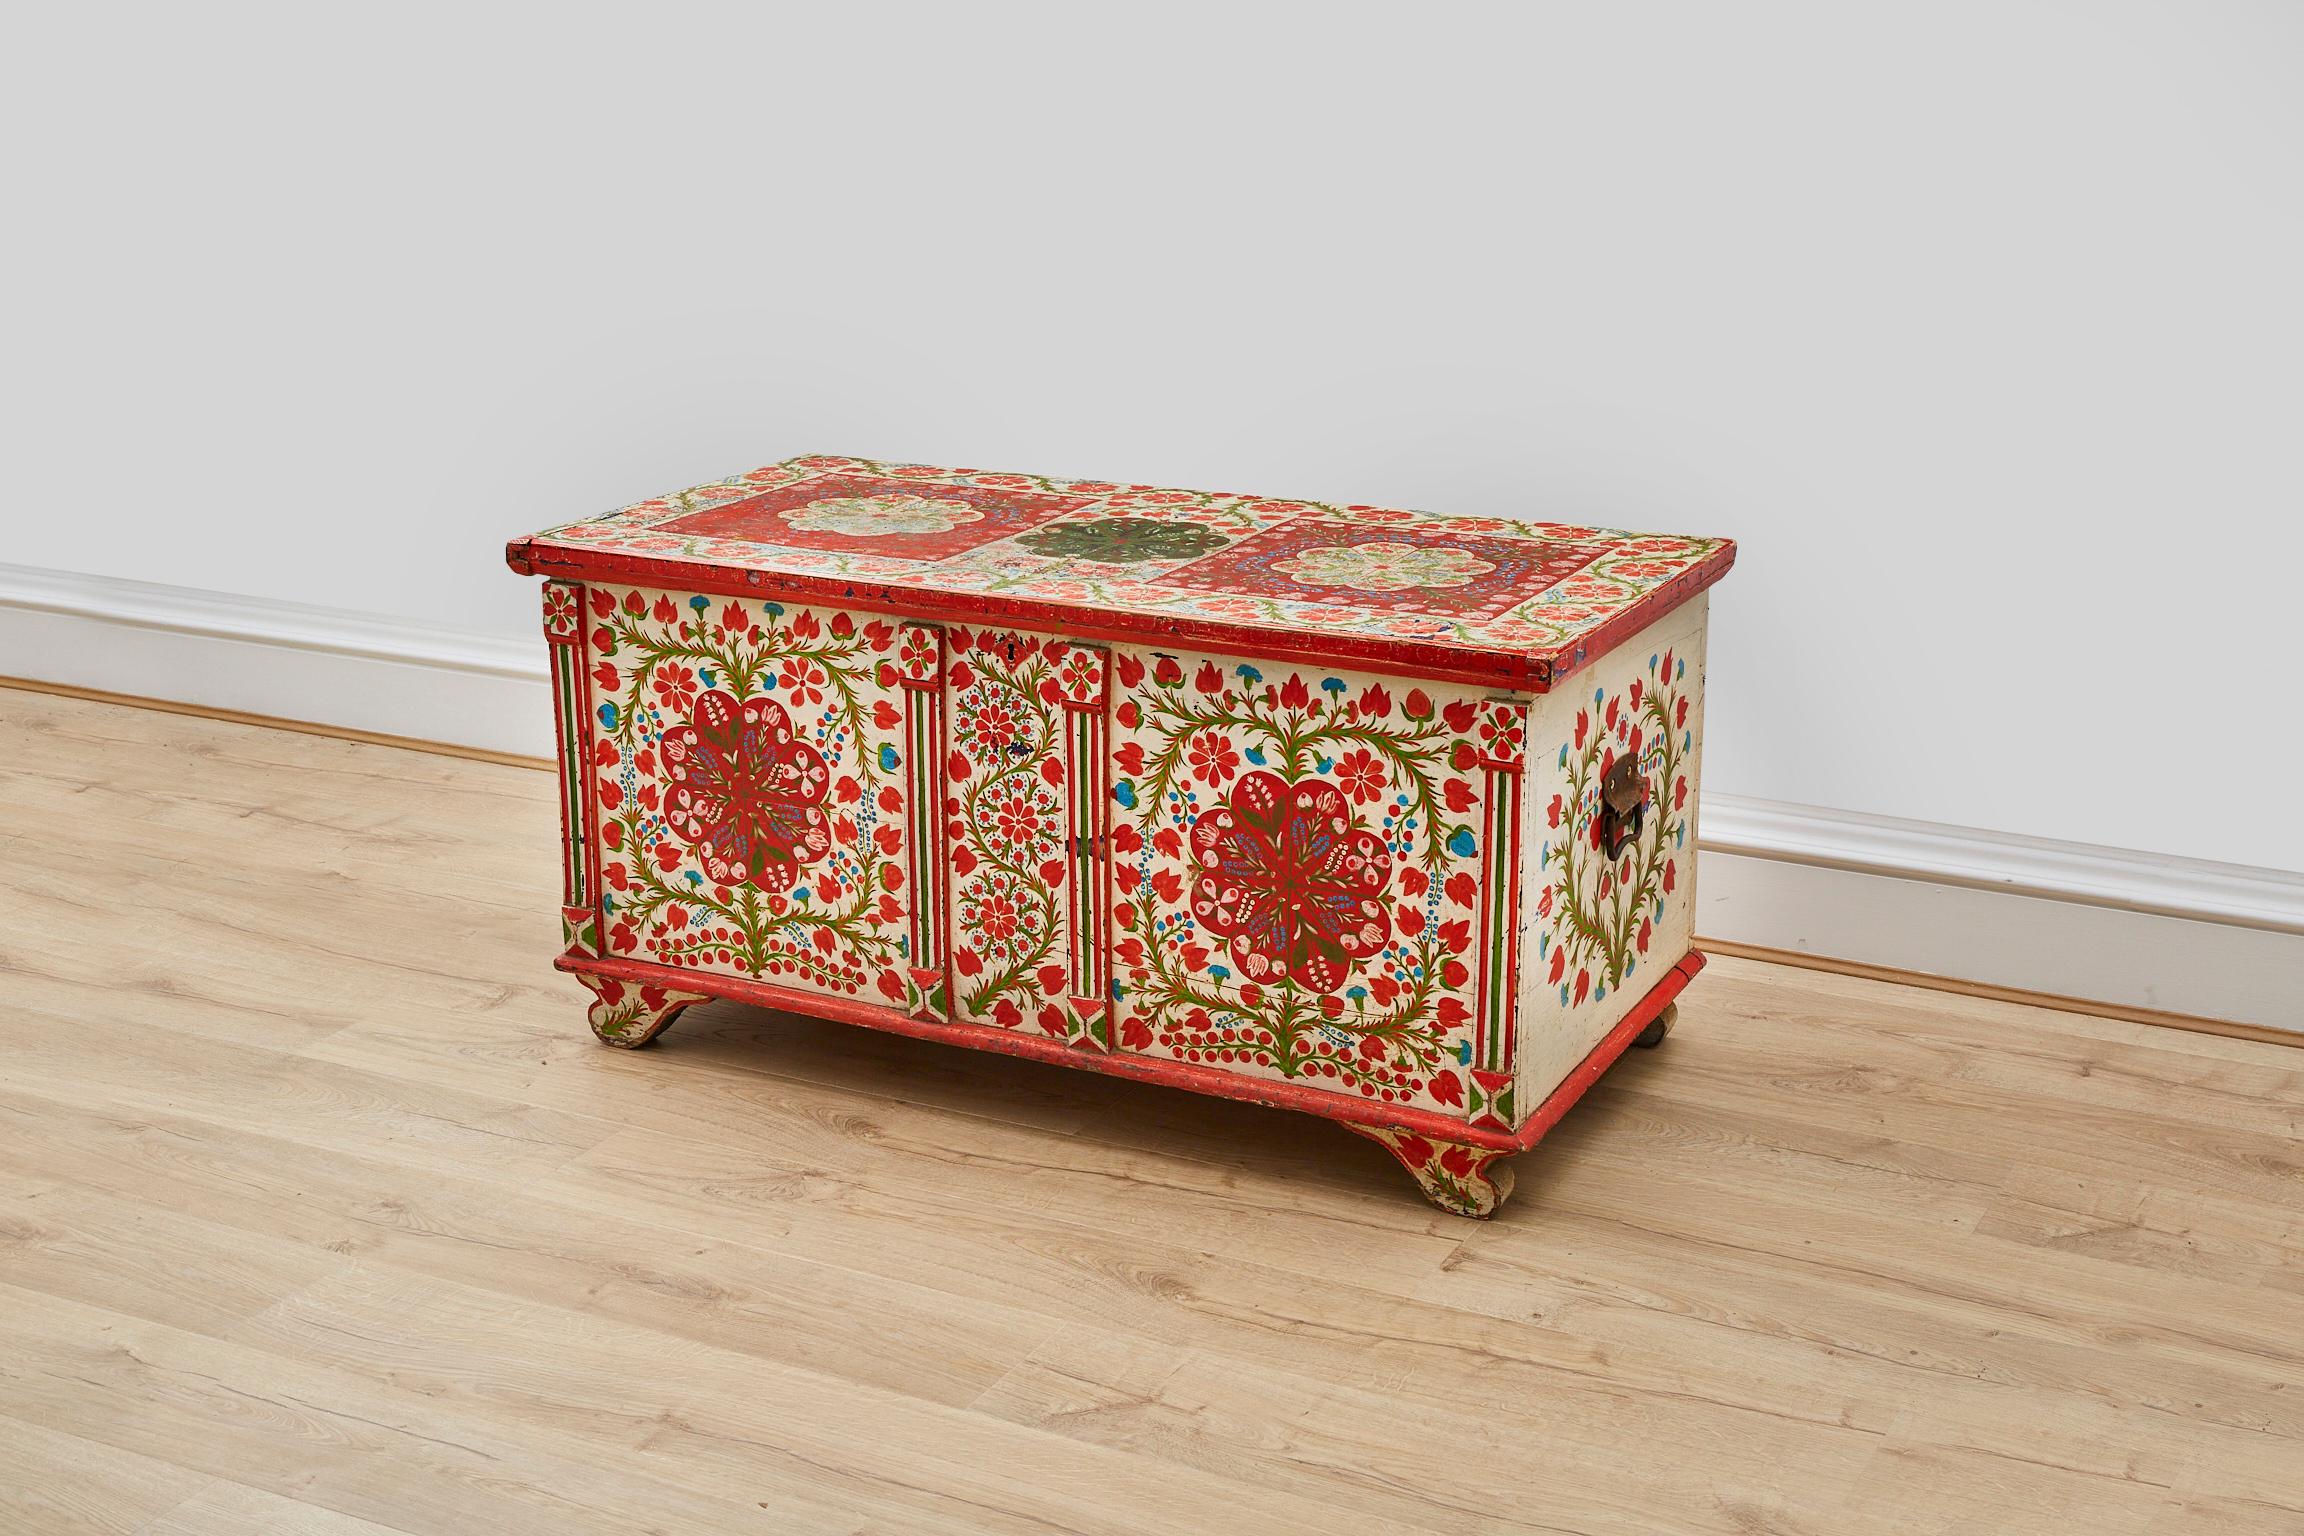 Hungarian Vintage Folk Art Painted Trunk/Chest Early Mid 20th Century